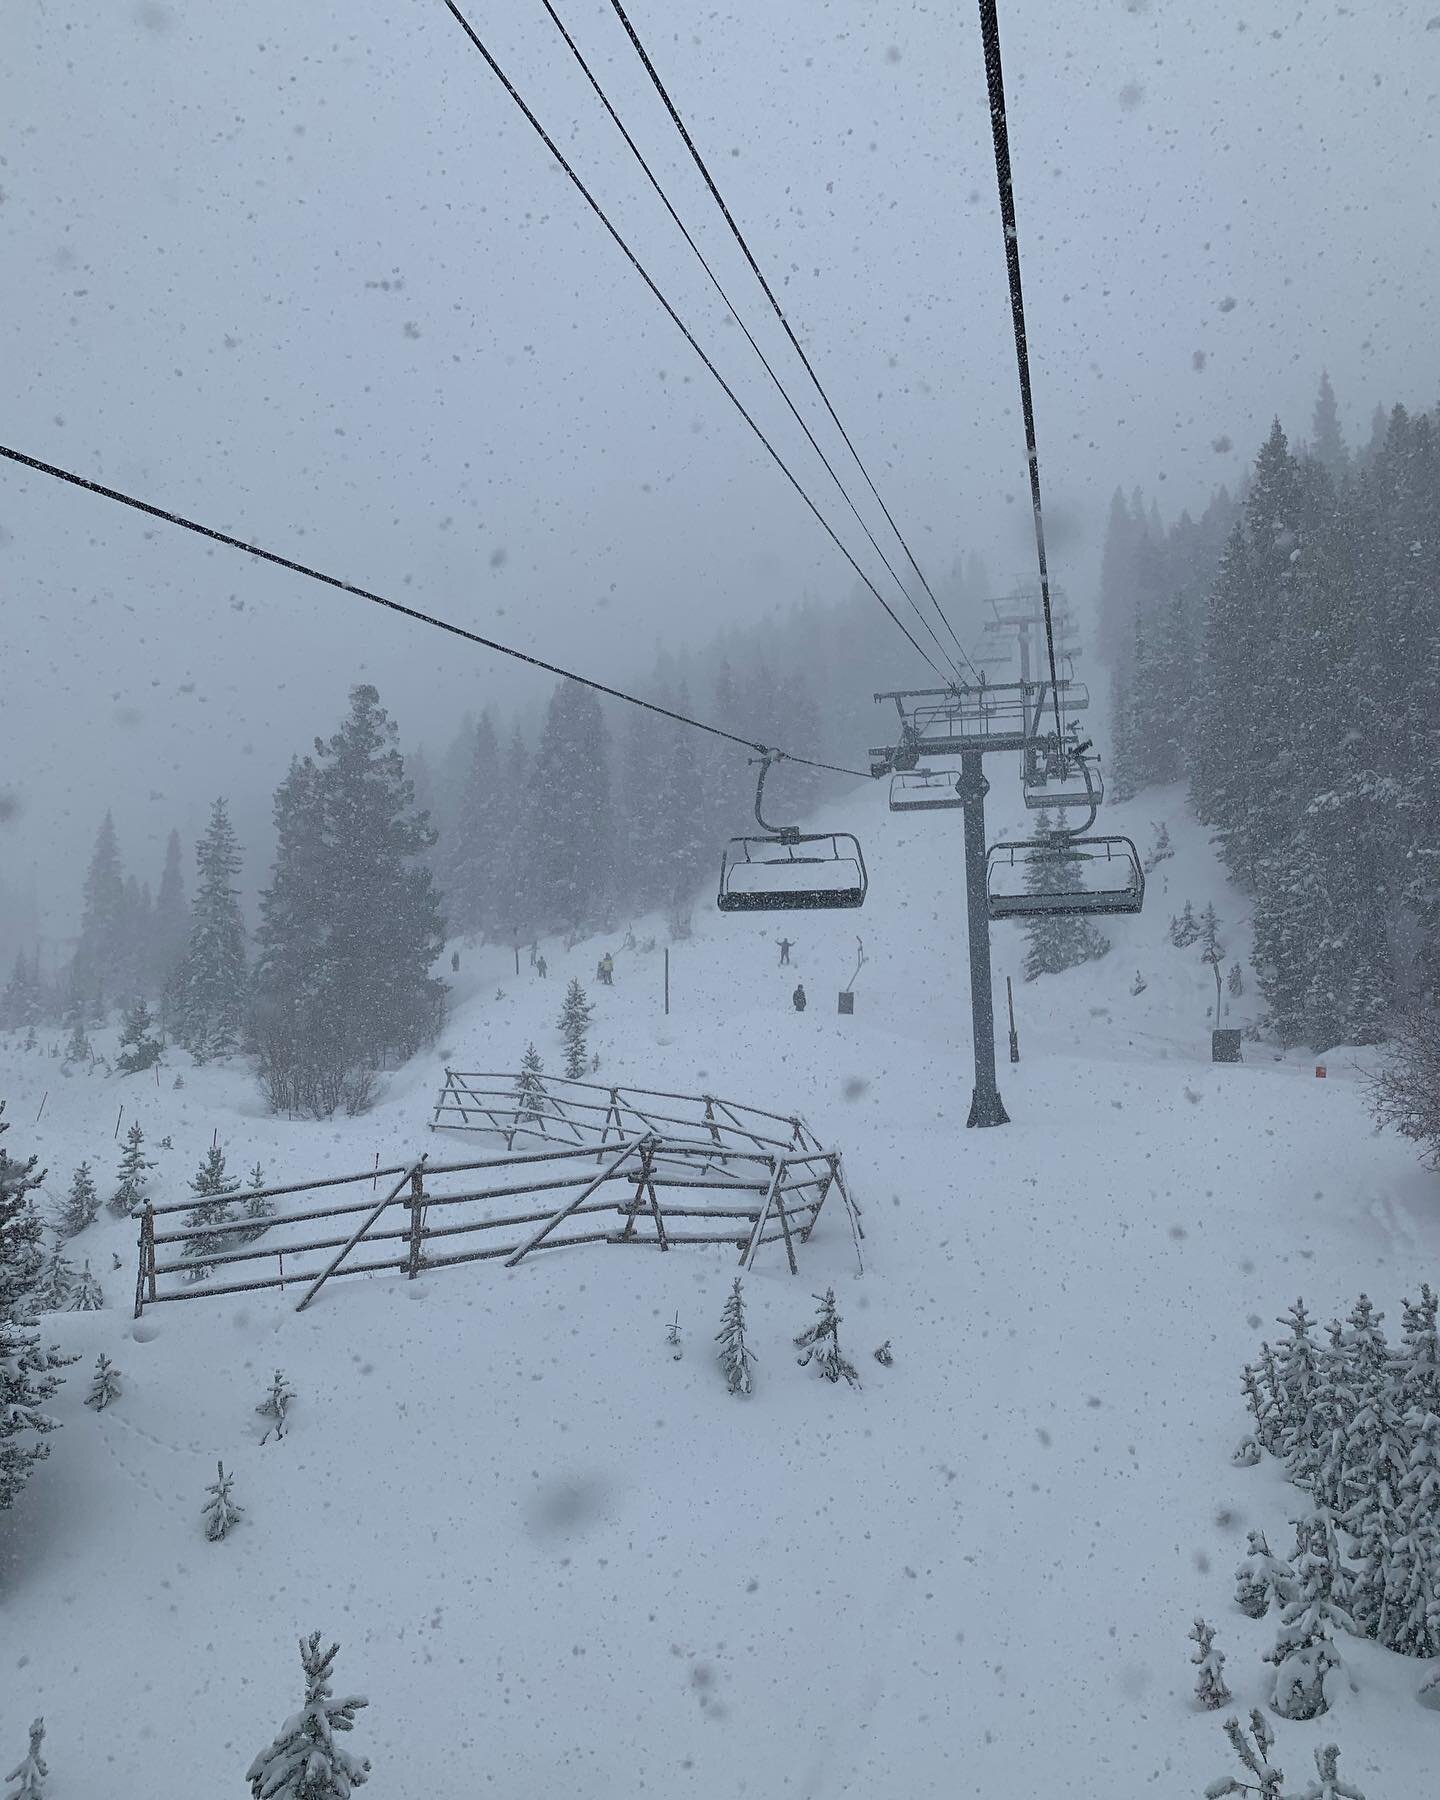 Quite the change from yesterday. Cold and snowy. Dumping all afternoon which made for the first powder turns of the season. Let it snow, let it snow, let it snow! Side note:  the roads were nasty. Be careful out there. #powder #vail #snow #transporta